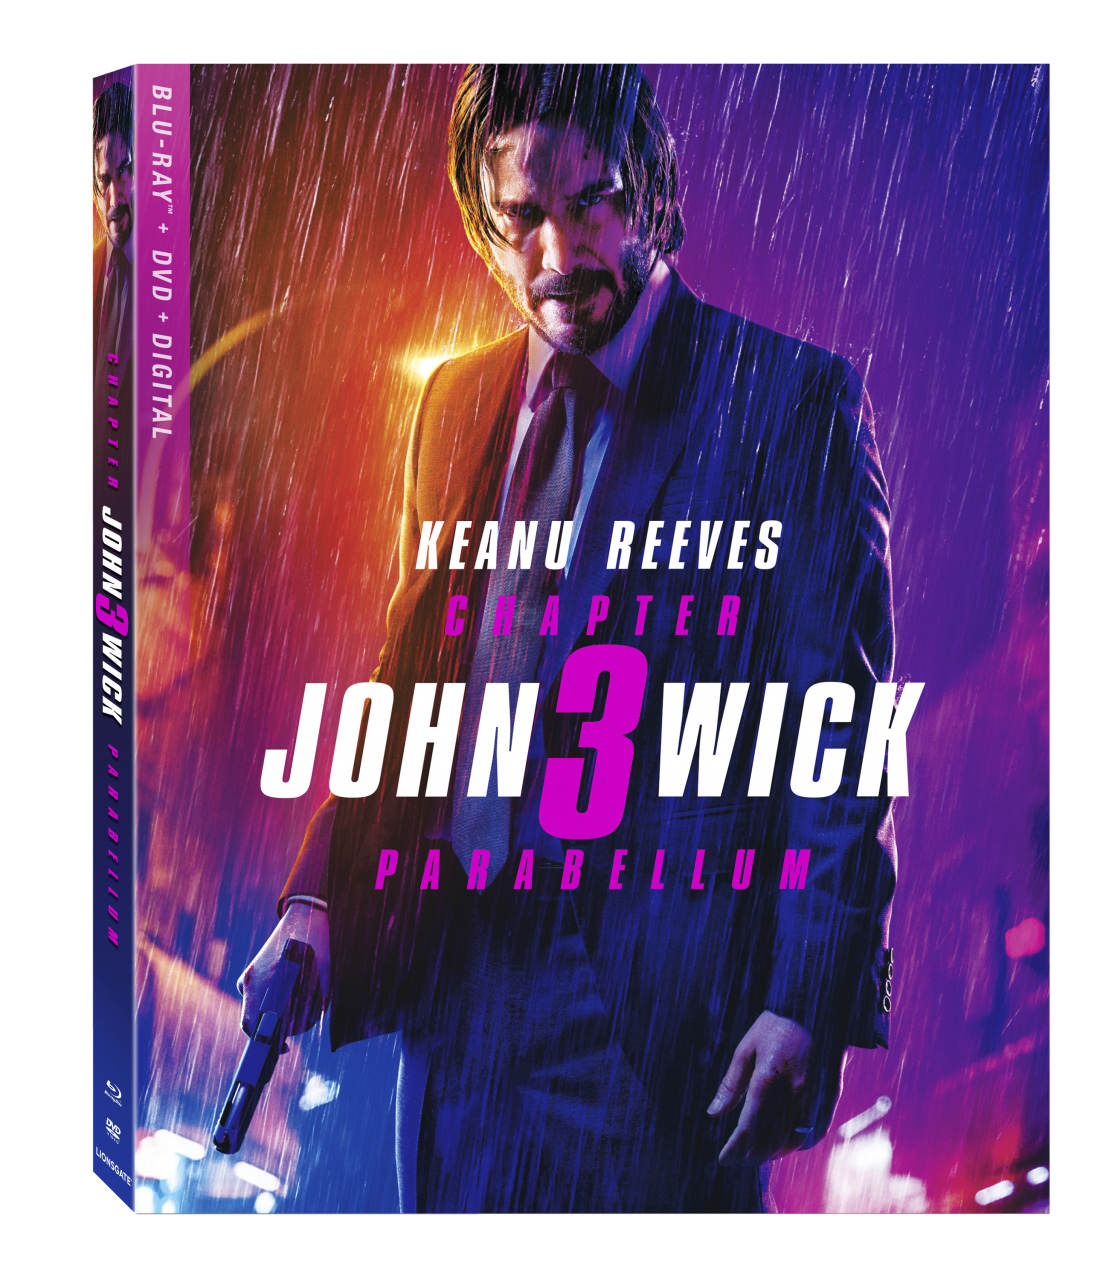 John Wick: Chapter 3 - Parabellum Blu-Ray Combo Pack cover (Lionsgate Home Entertainment)